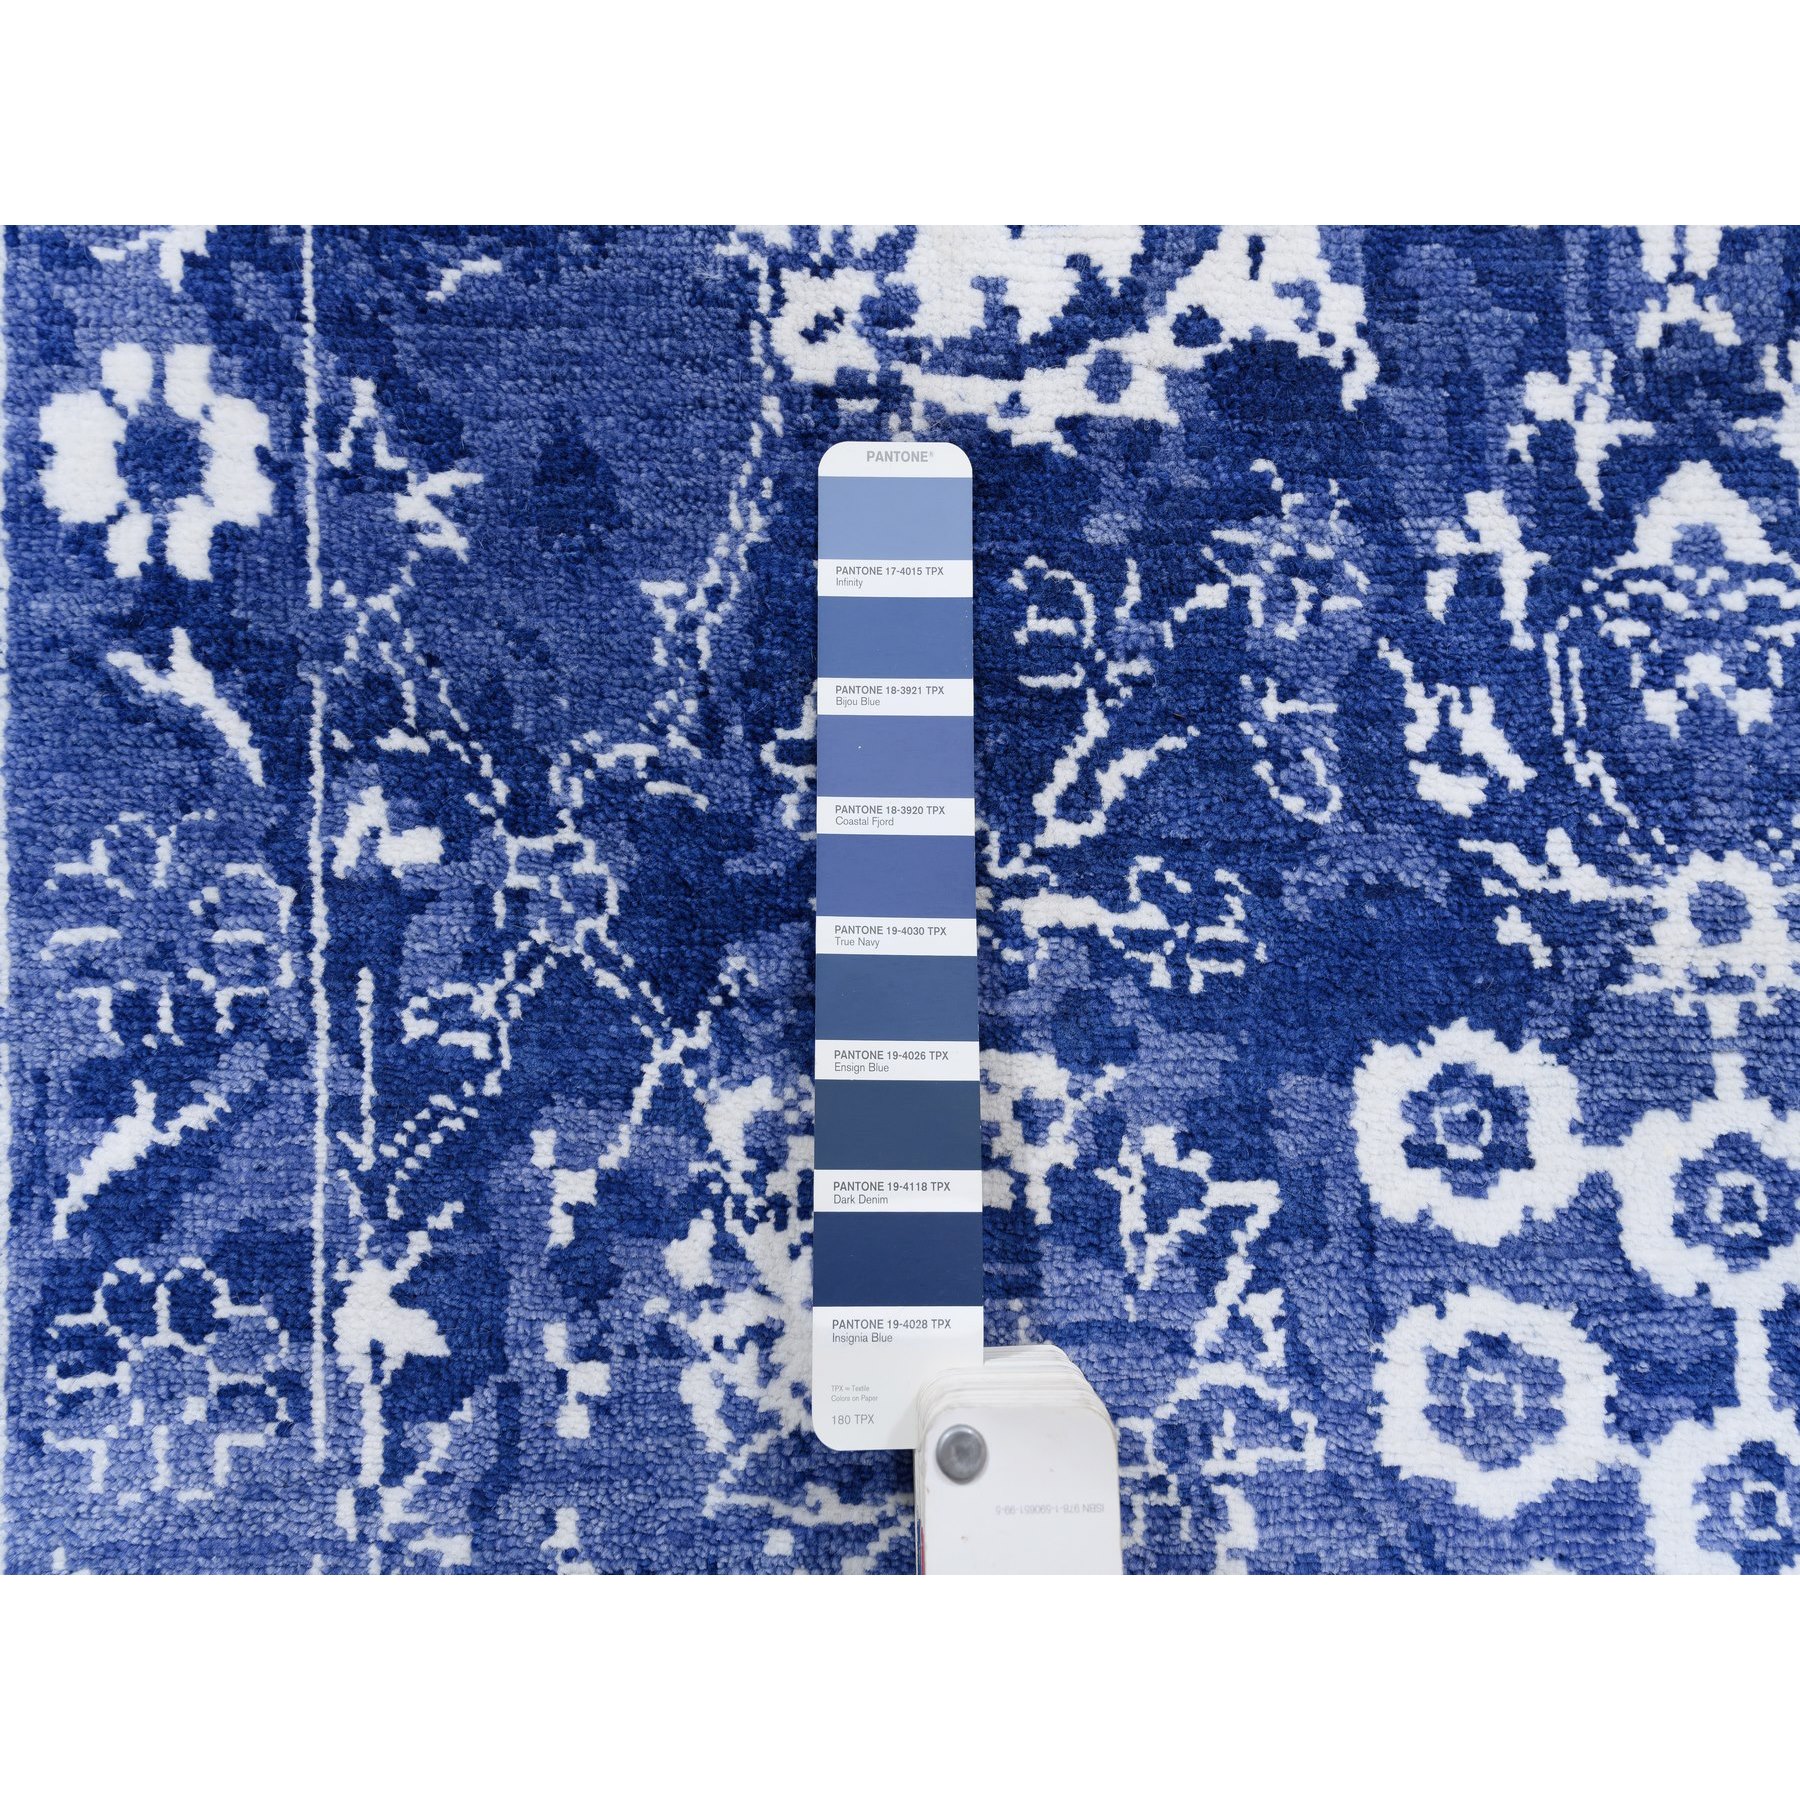 Transitional Hand Knotted Blue 1125878 Rug